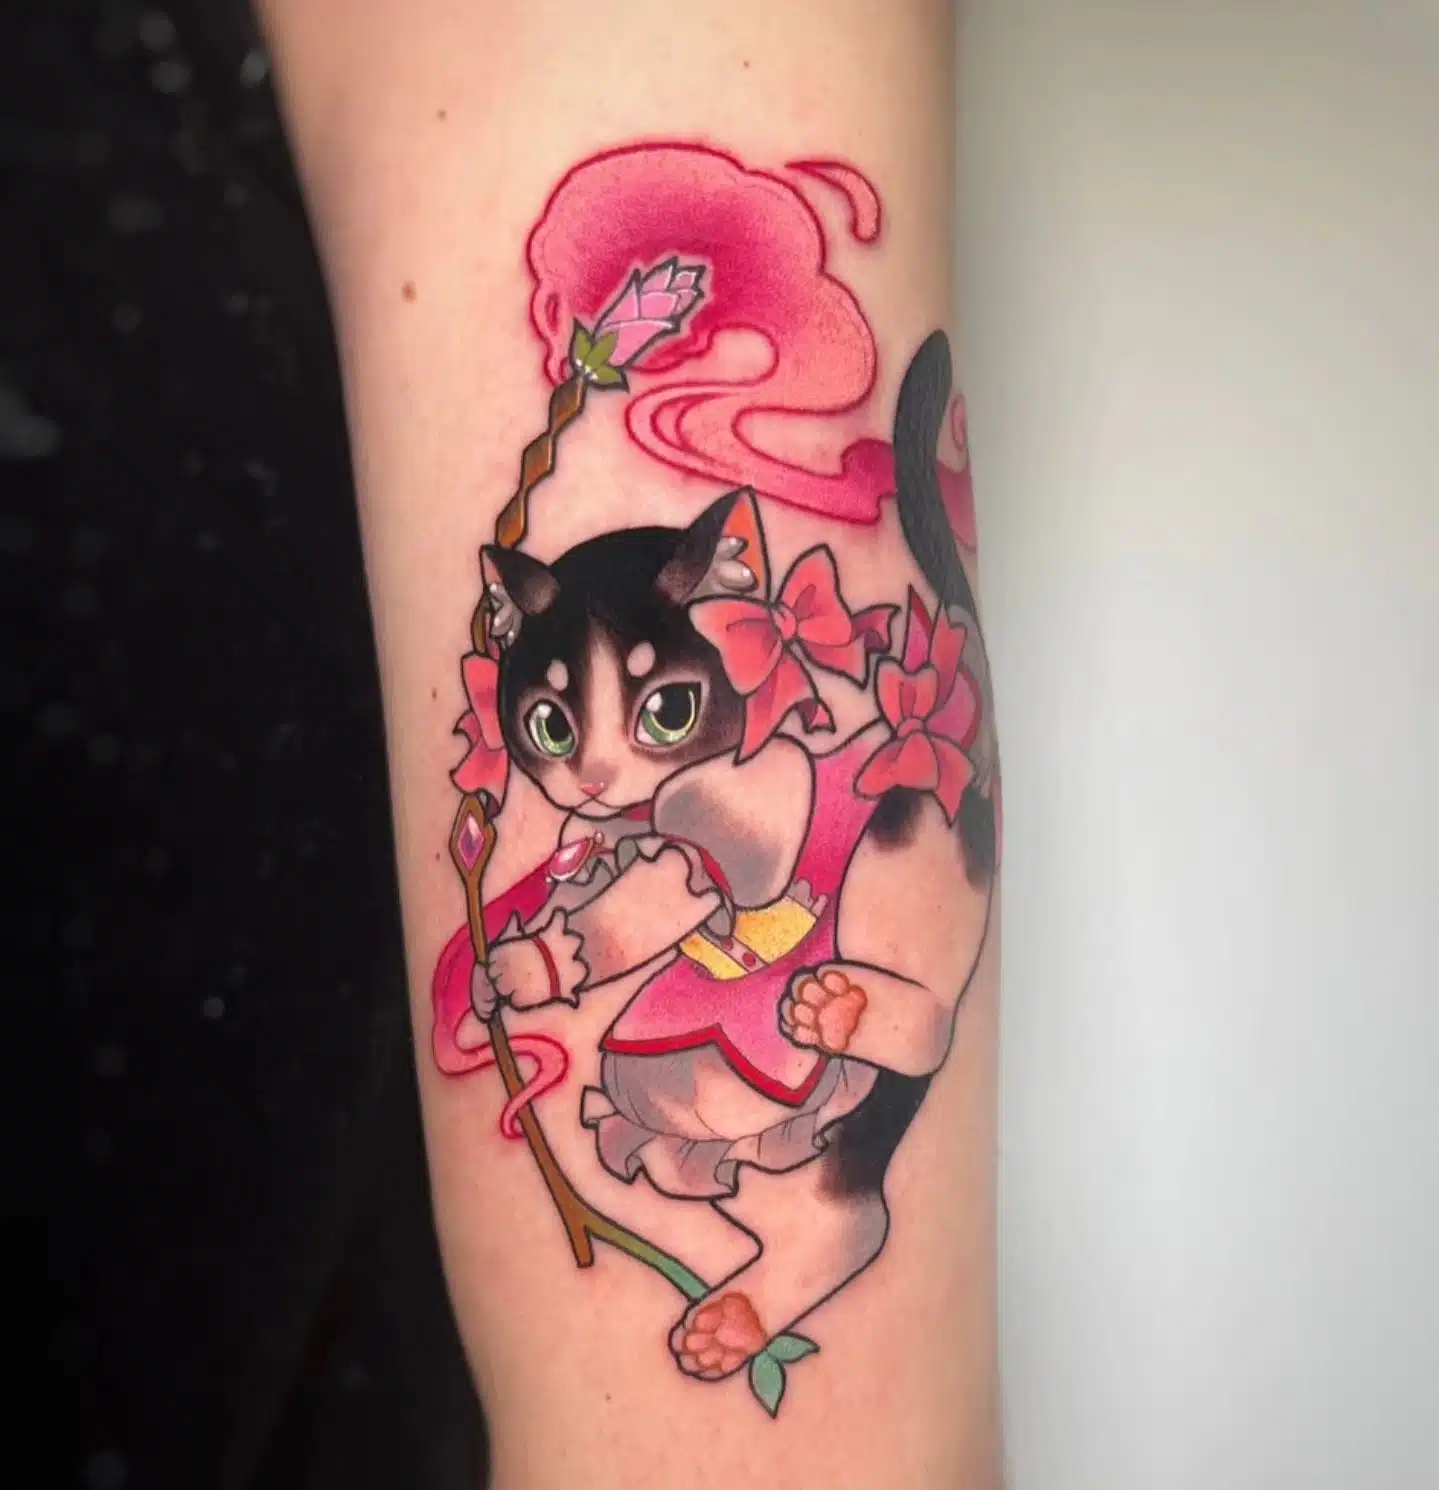 Puella Magi Madoka Magica cat by Natalia! It's soooo cute 🥹 naaat.j has a few gaps available this week- get in touch to book in!!!!

               